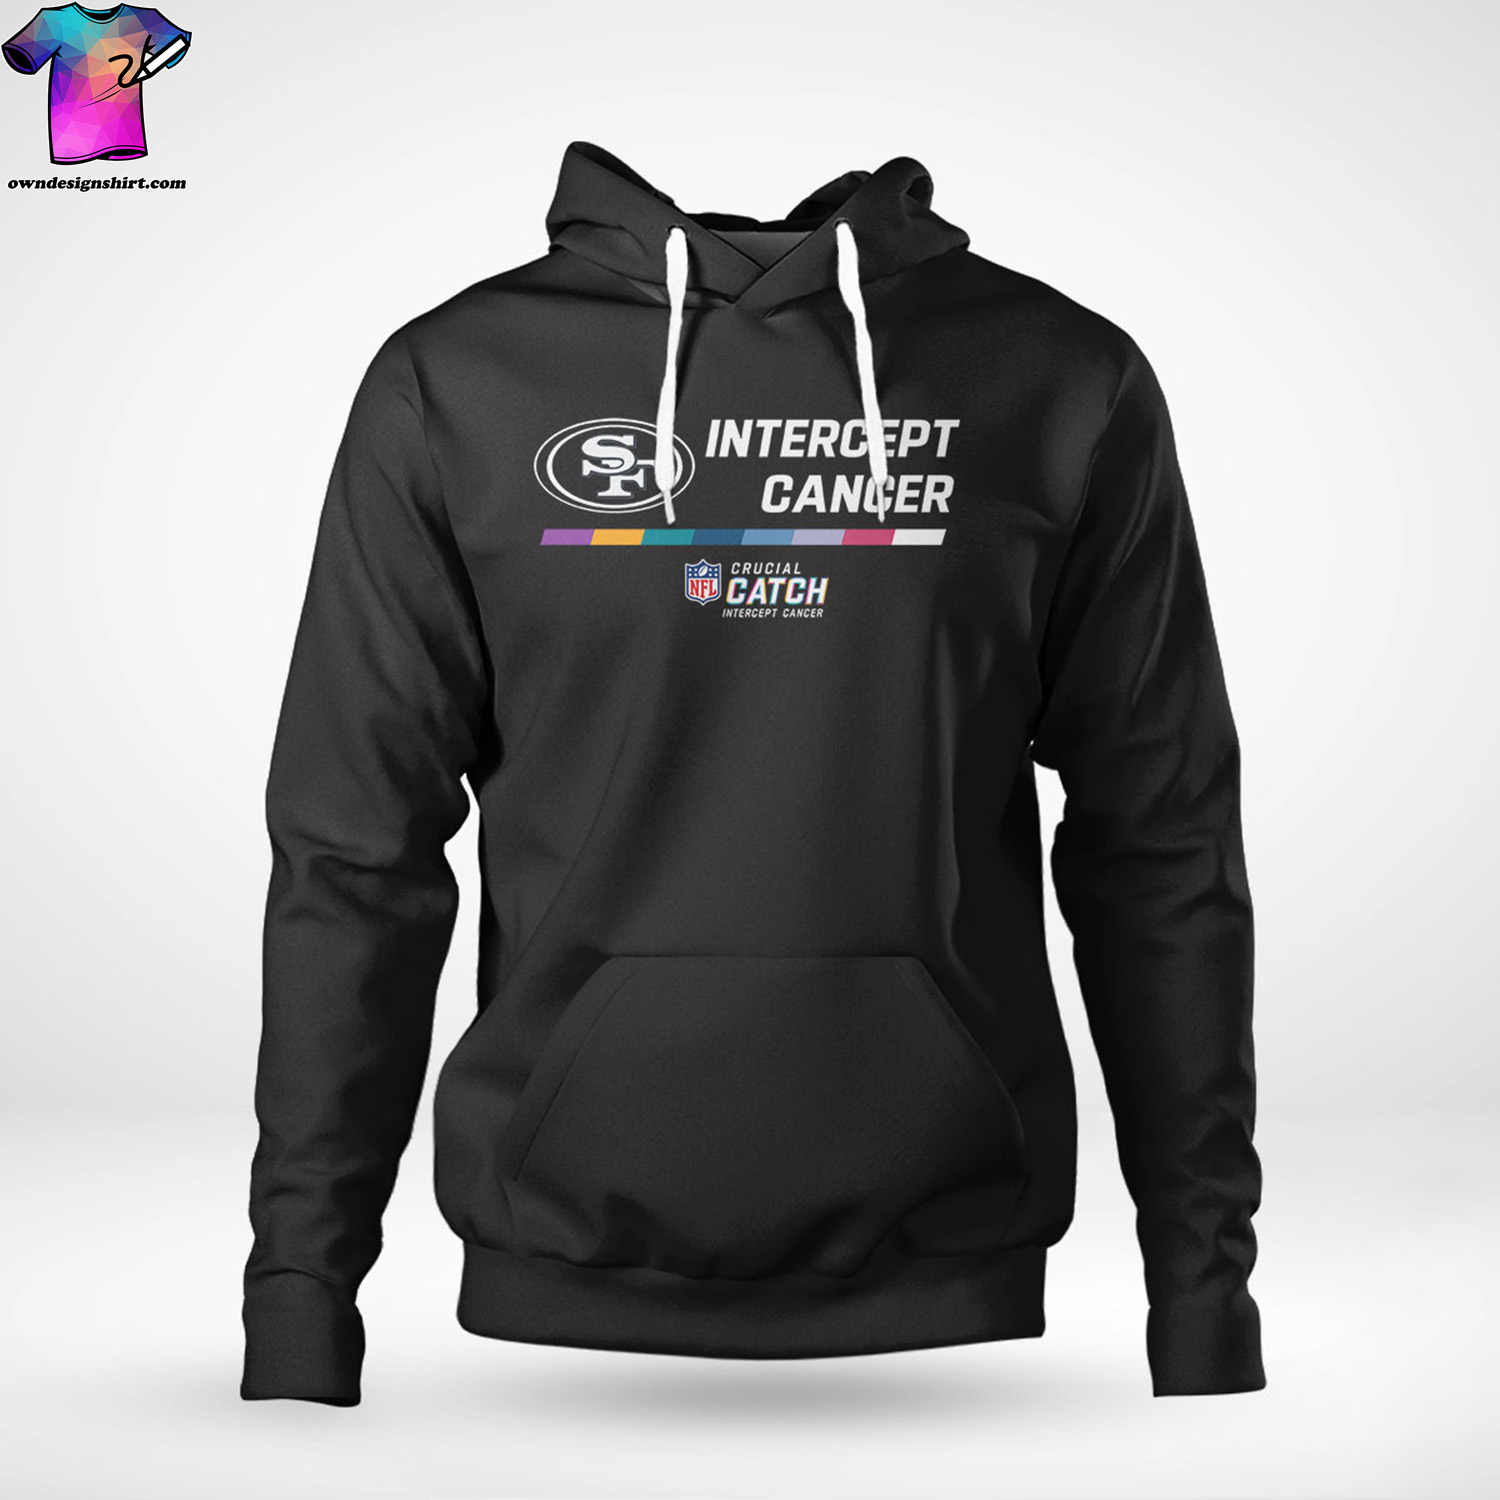 Tackling Cancer Join the NFL in Intercepting Cancer with the Hoodie that Makes a Difference